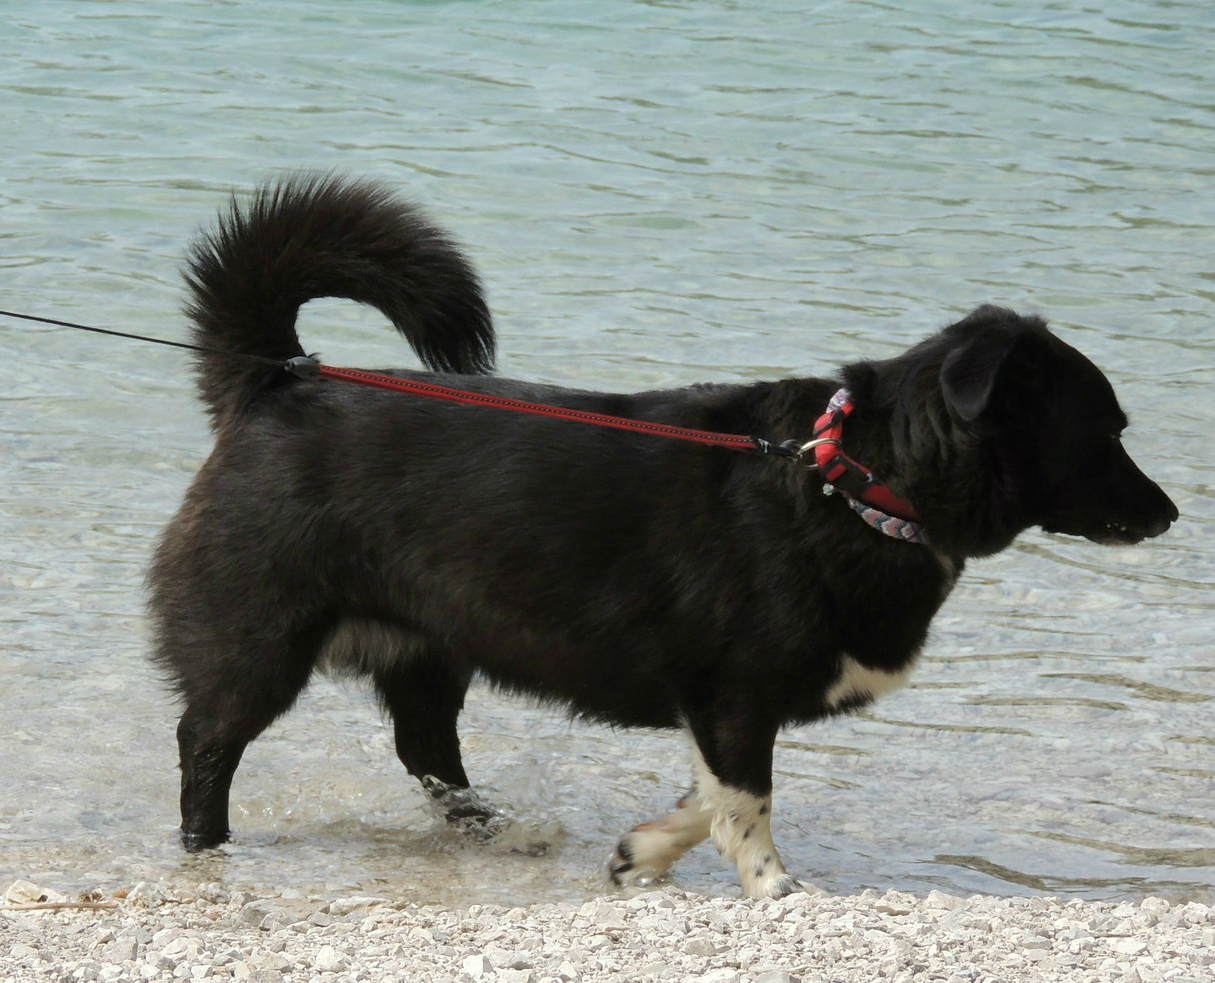 A pet held on a leash